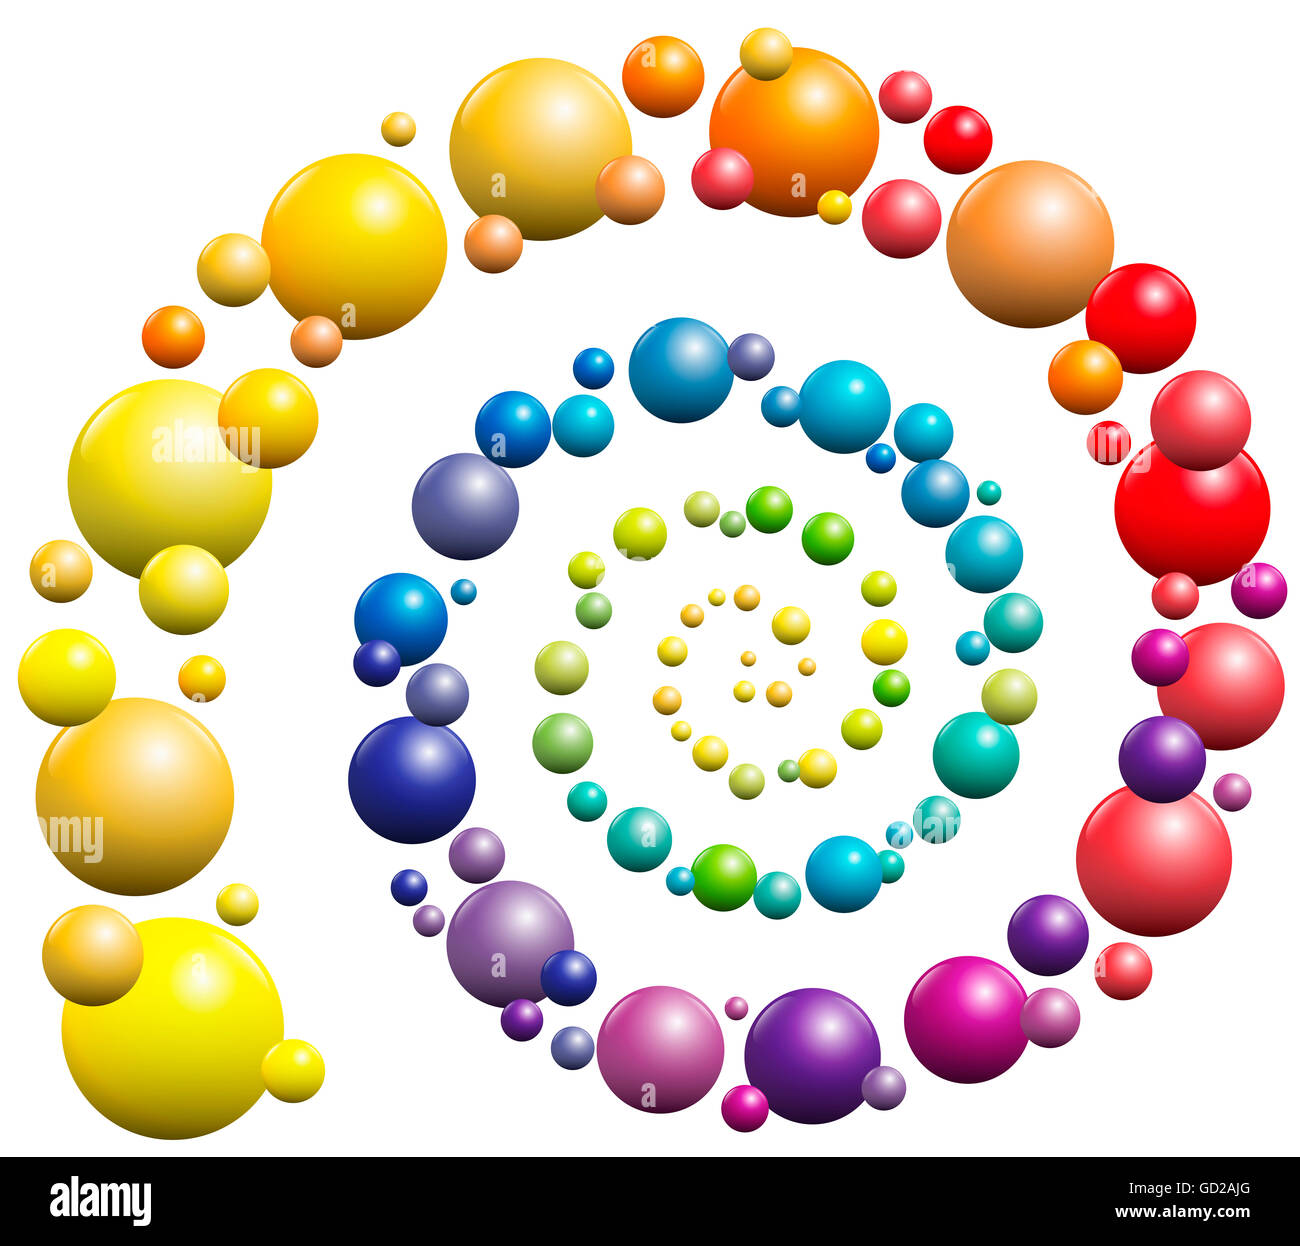 Rainbow gradient colored spiral pattern out of balls. Stock Photo